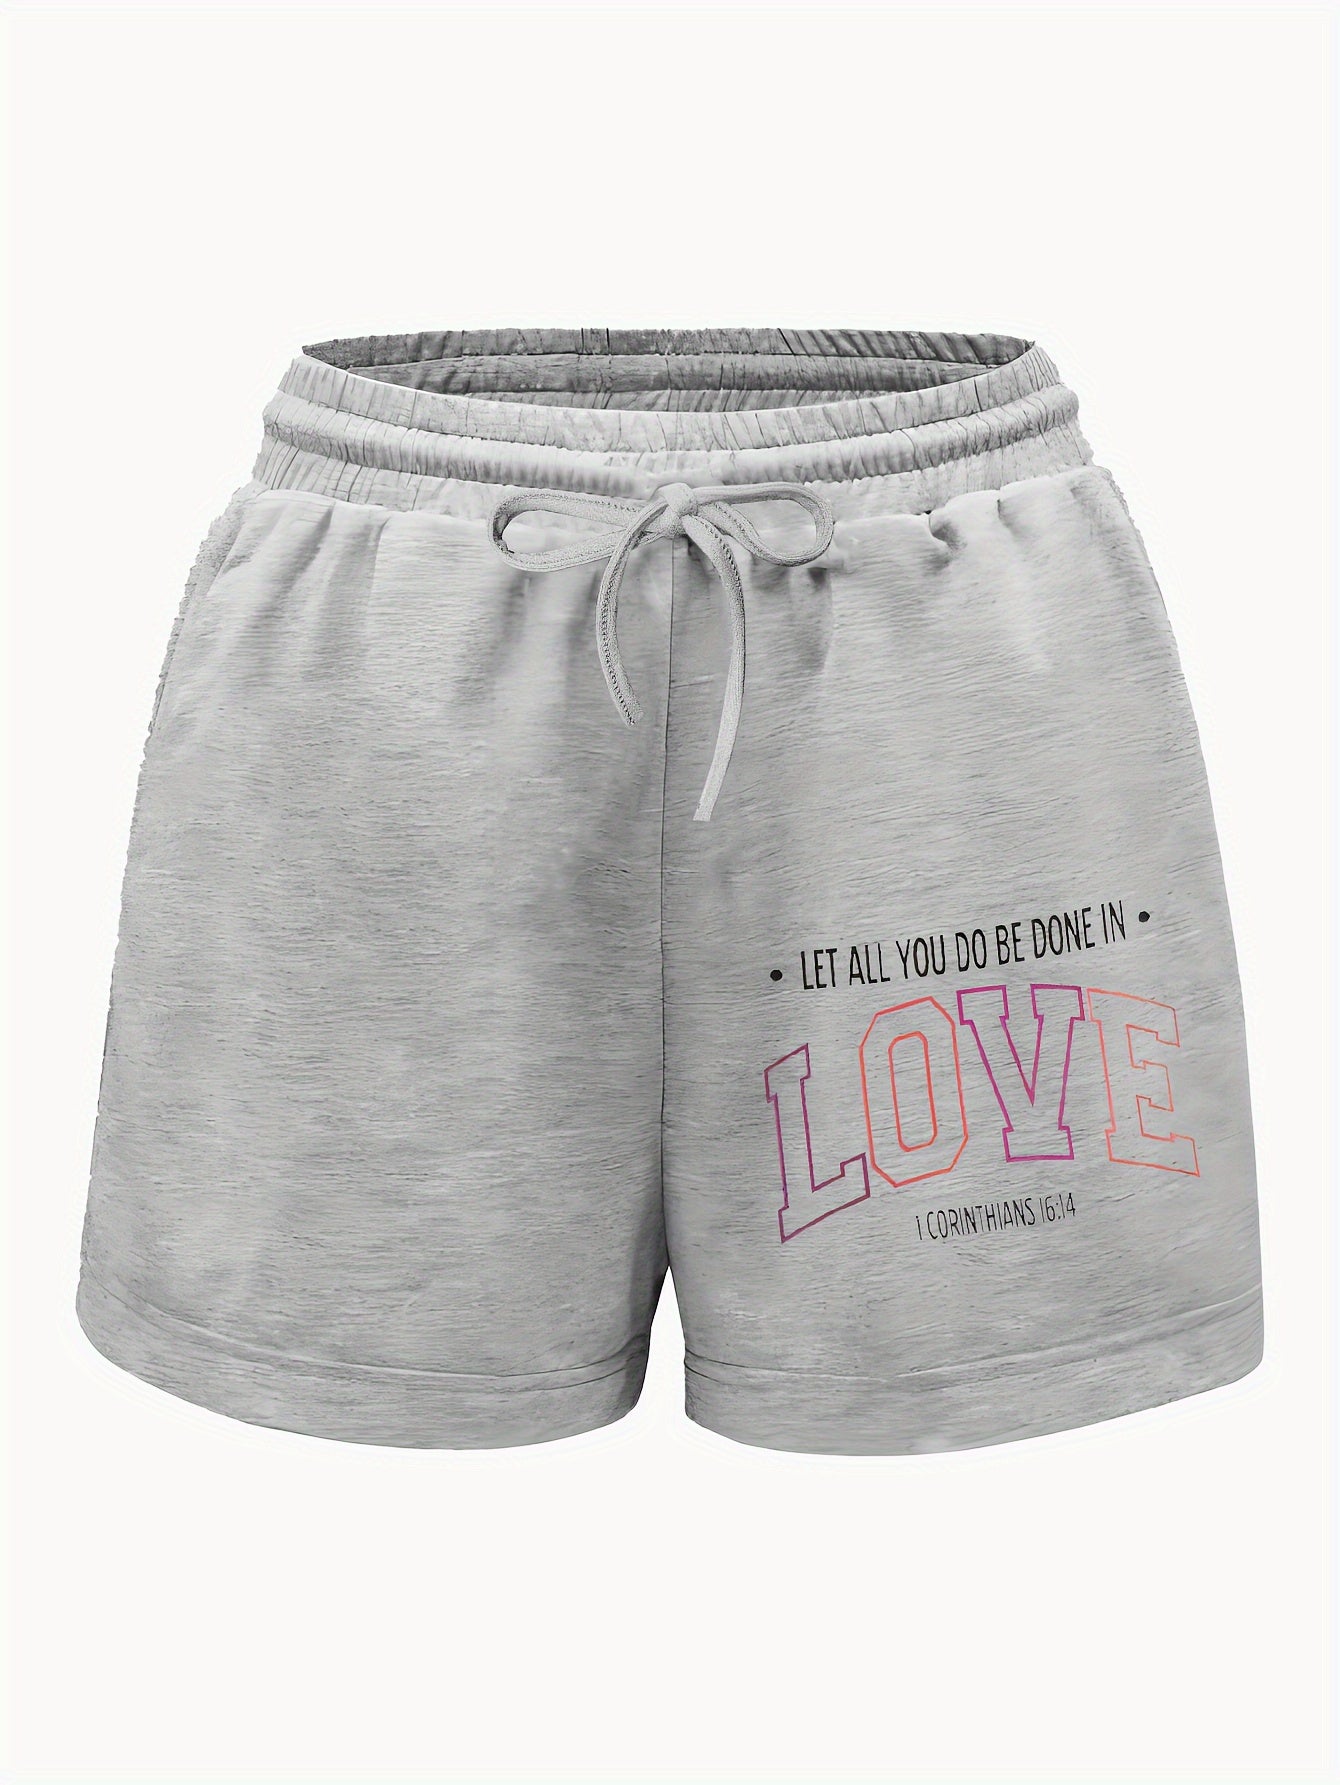 Let All You Do Be Done In Love Women's Christian Shorts claimedbygoddesigns